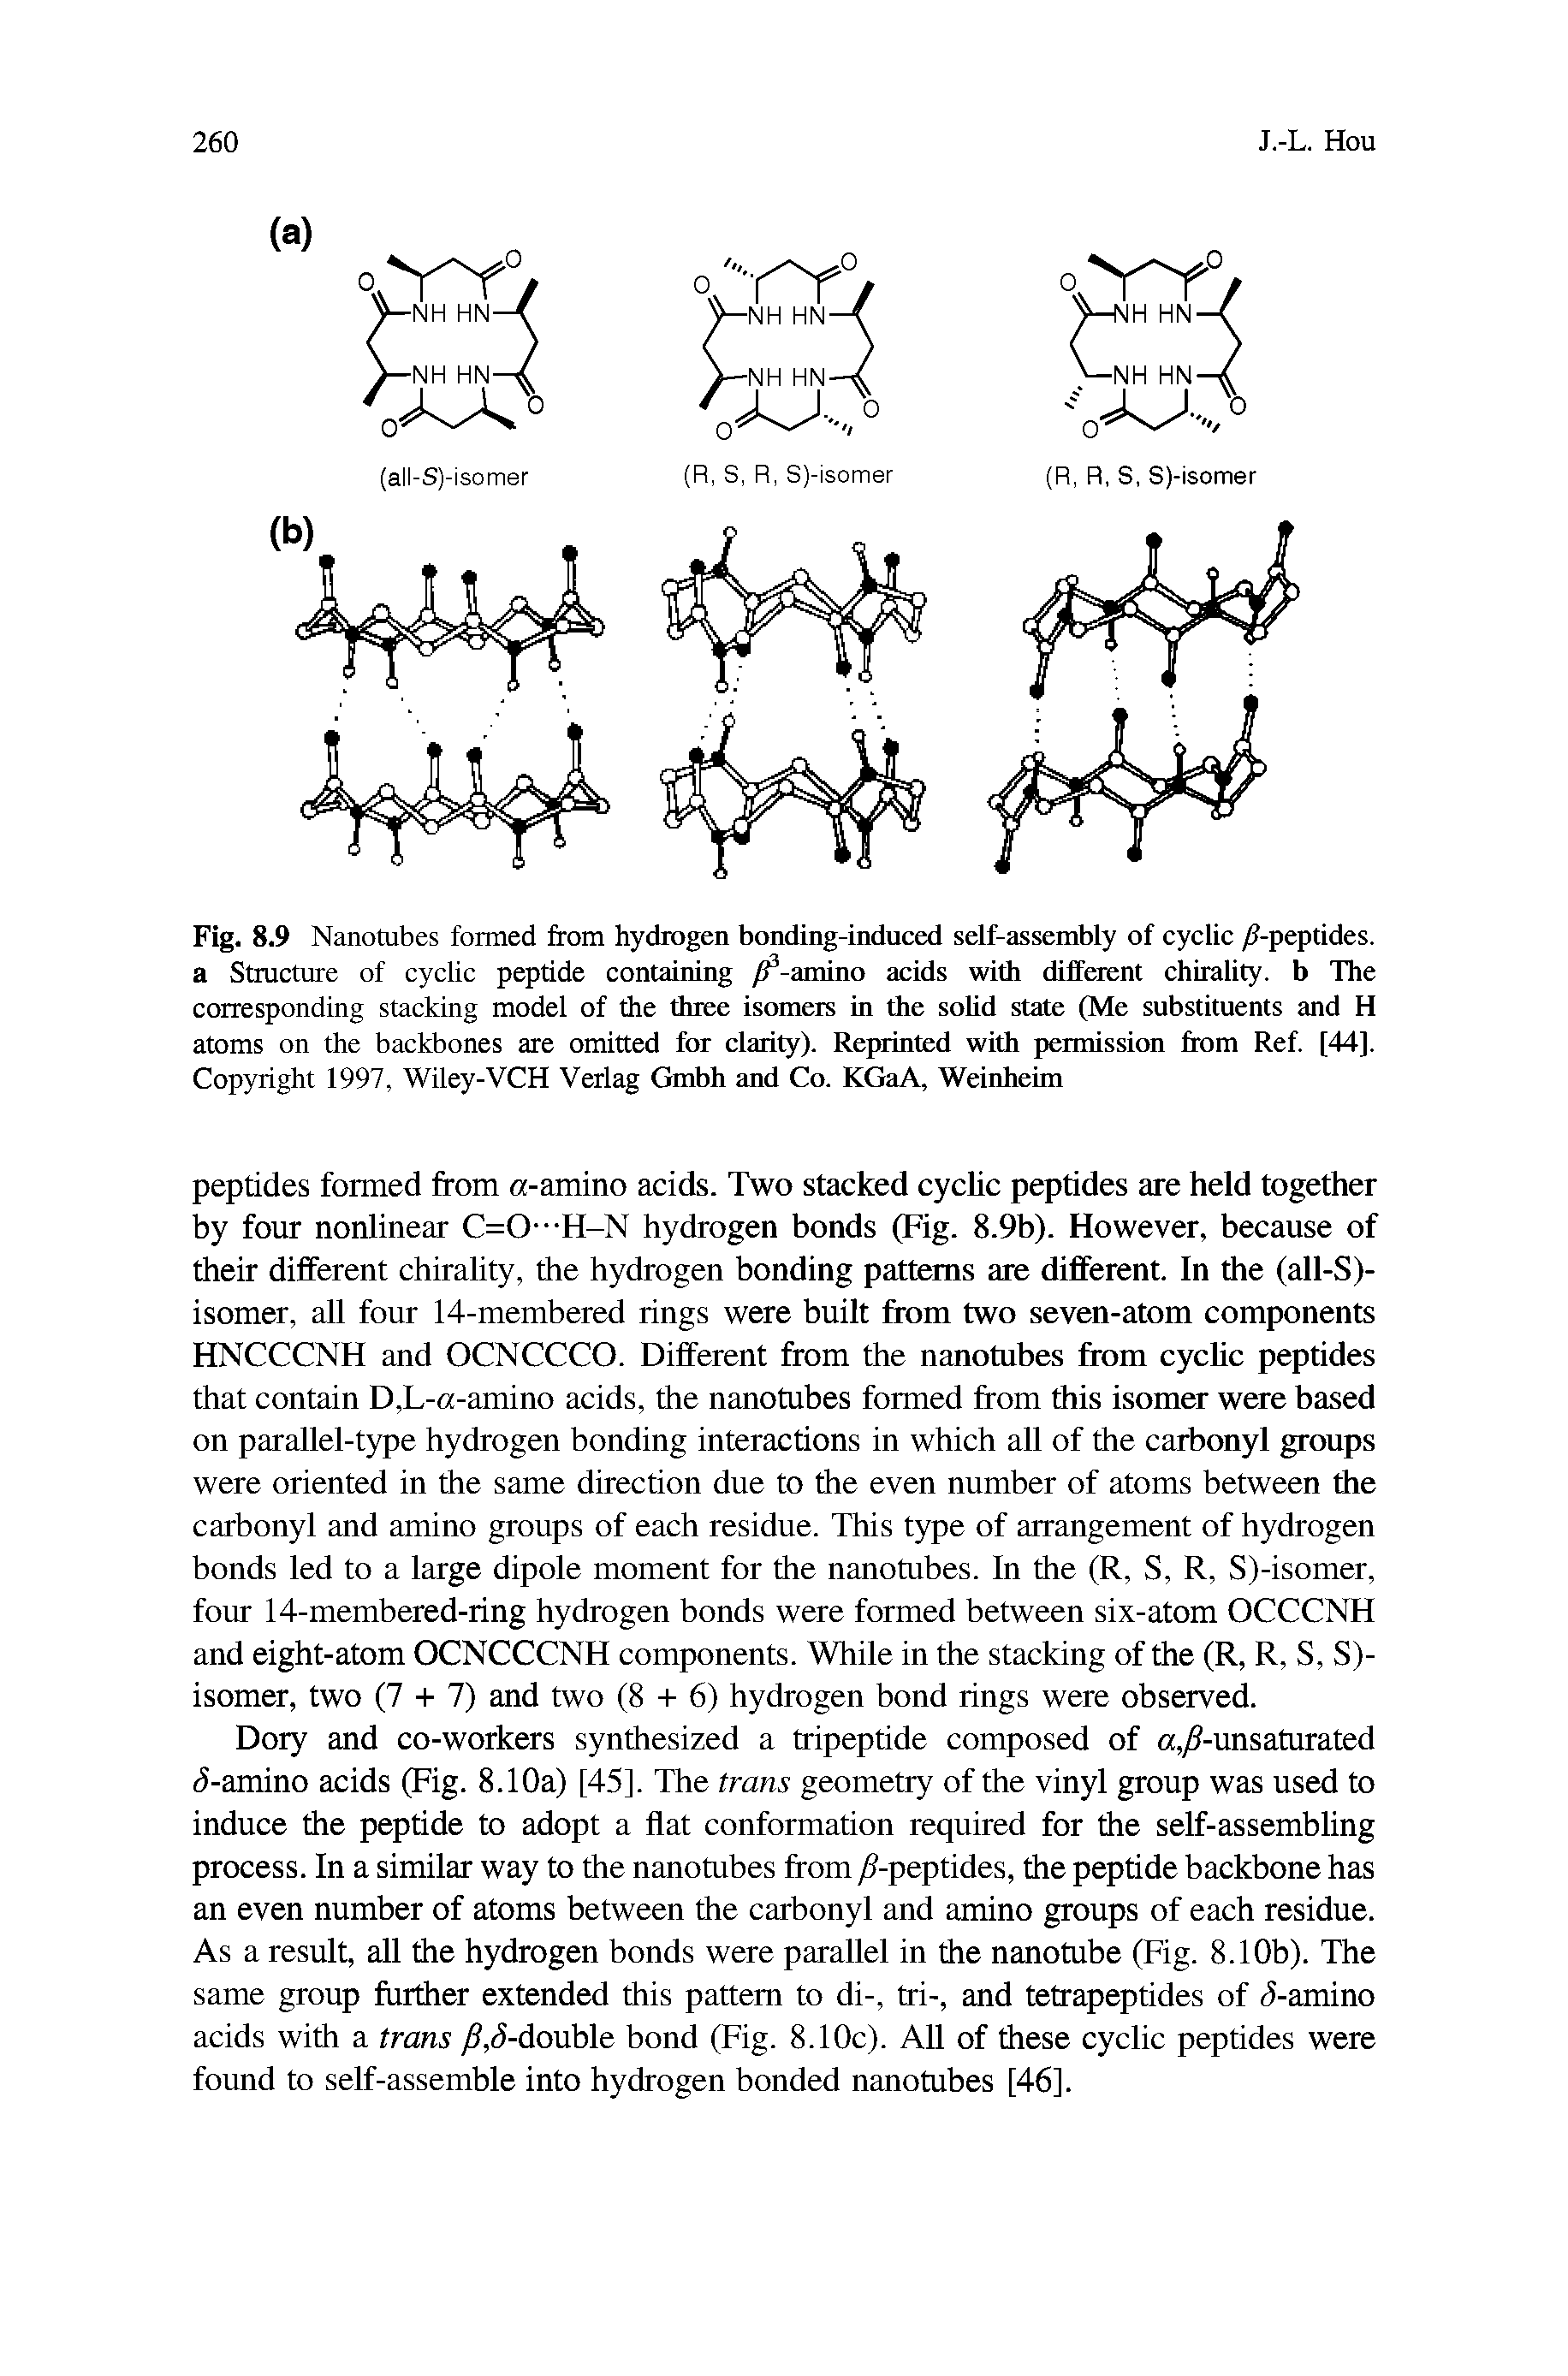 Fig. 8.9 Nanotubes fonned from hydrogen bonding-induced self-assembly of cyclic -peptides, a Stracture of cyclic peptide containing -amino acids with diifcm nt chirality, b The corresponding stacking model of the three isomers in the solid stale (Me substituents and H atoms on the backbones are omitted for clarity). Re ninted with permission from Ref [44]. Copyright 1997, Wiley-VCH Verlag Gmbh and Co. KGaA, Weinheim...